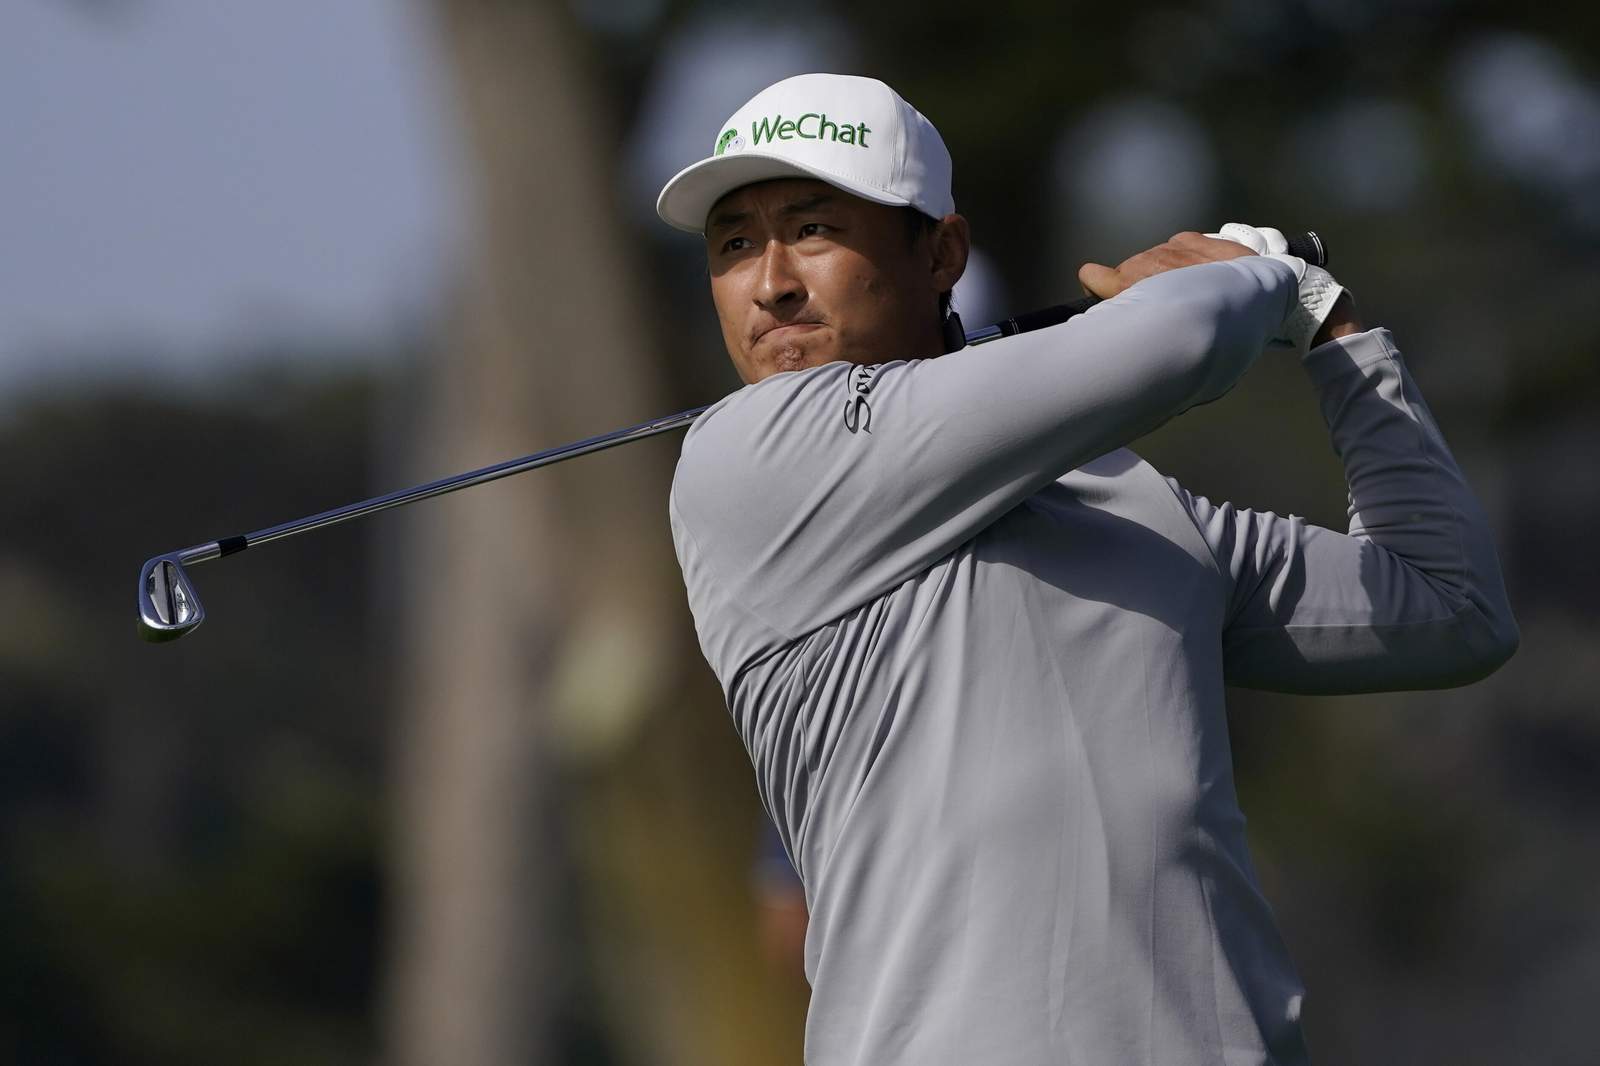 Li at his best and builds early lead at PGA Championship